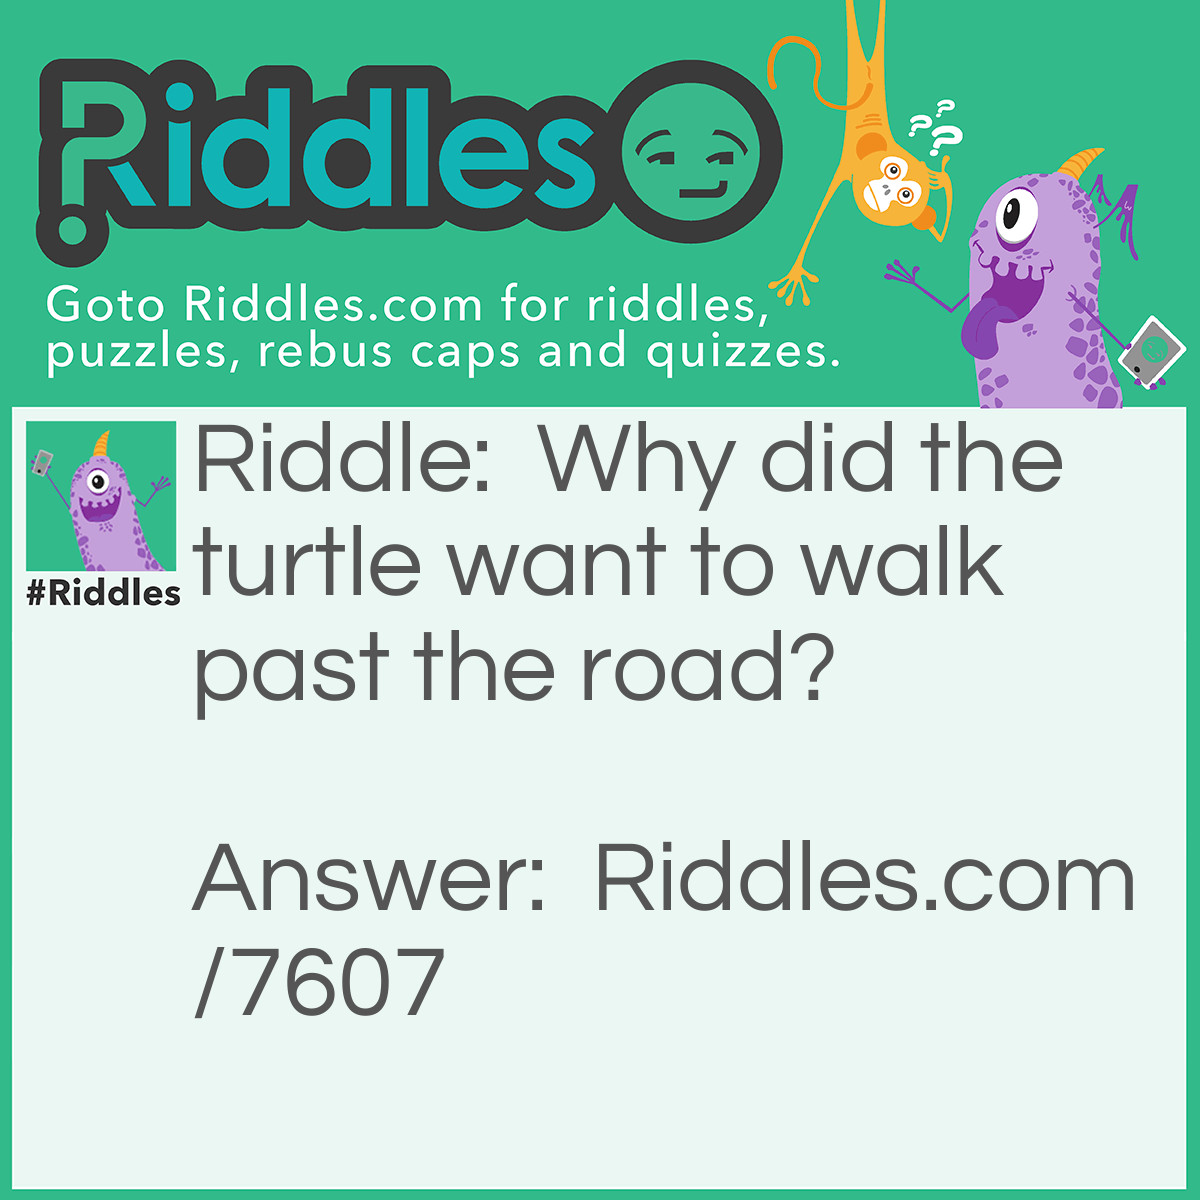 Riddle: Why did the turtle want to walk past the road? Answer: Because he wanted to go to shell station.